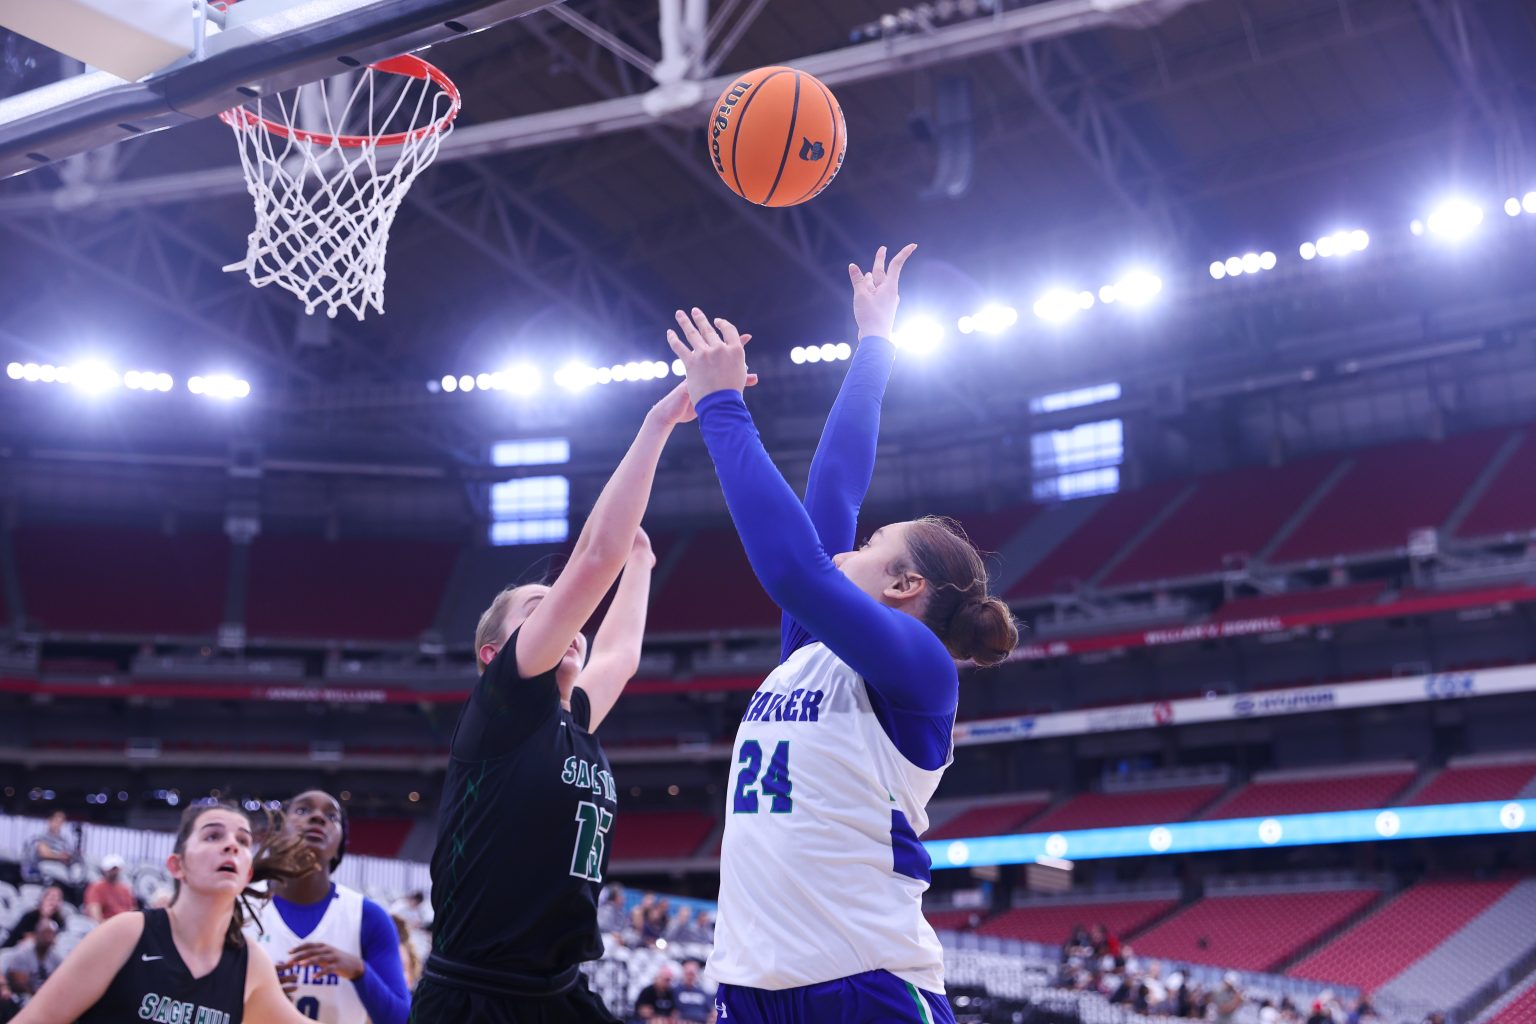 Section 7 basketball tournament opens with girls showcase at State Farm